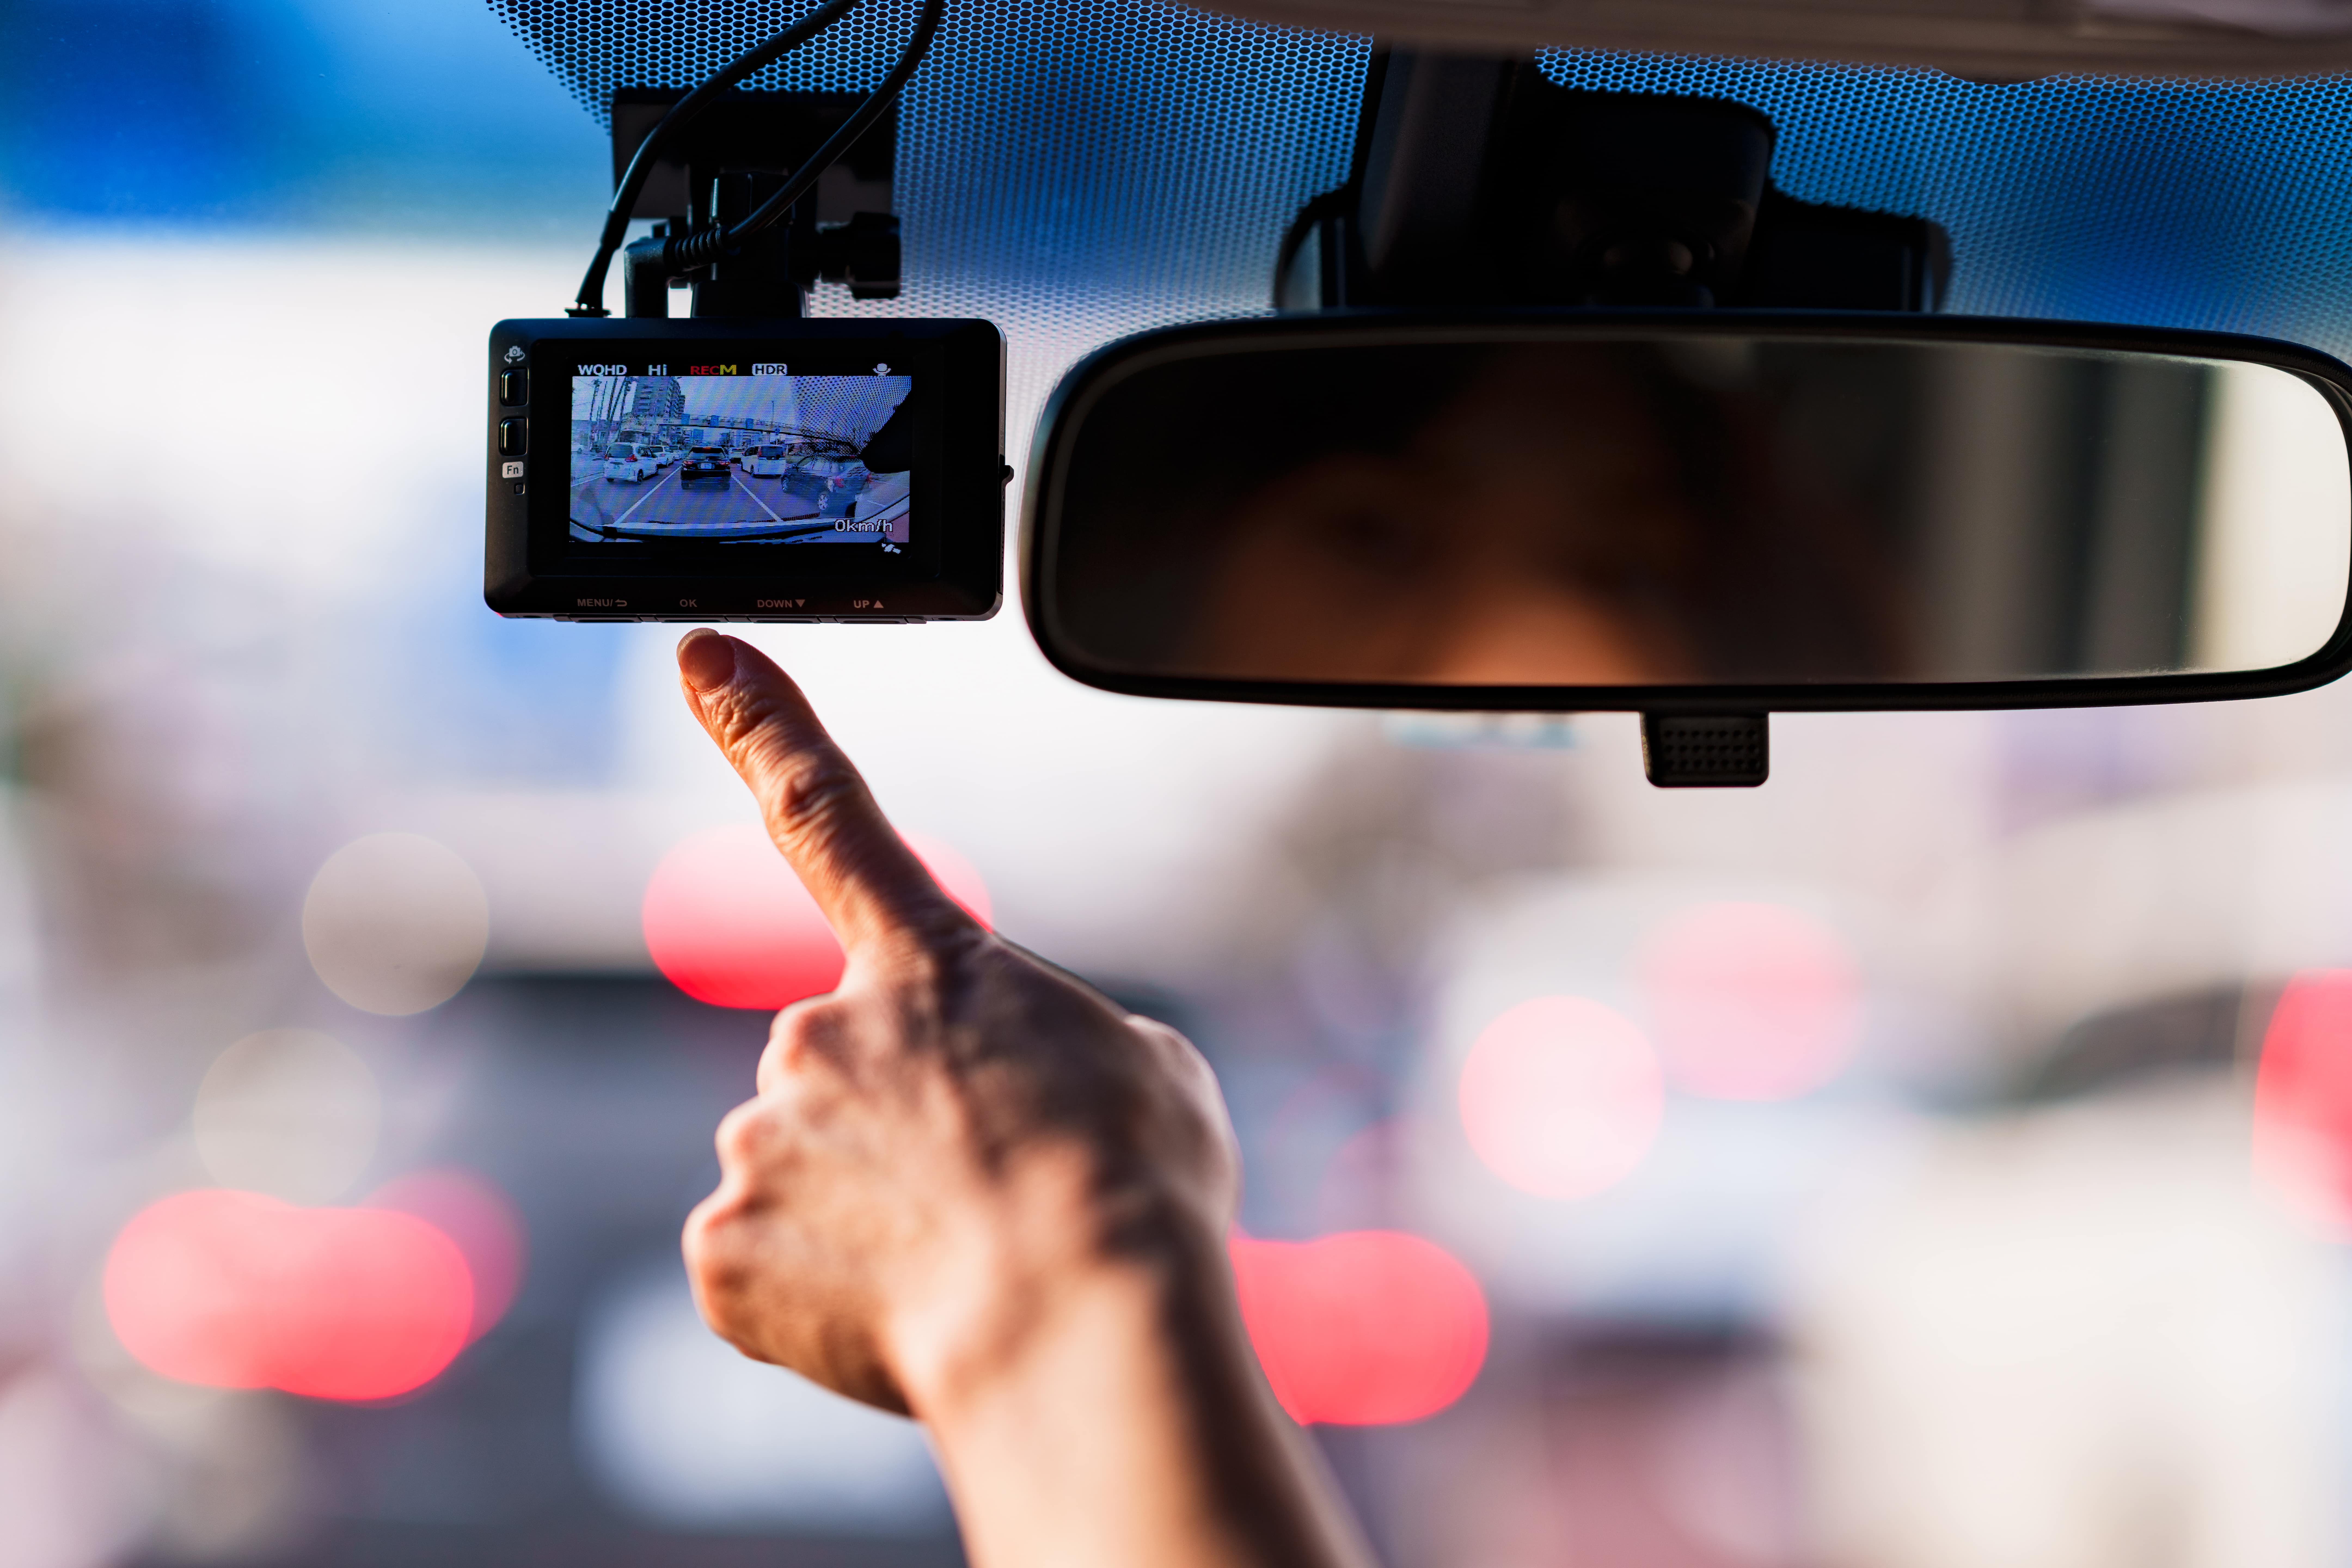 Is Dash Cam Footage Admissible in Court?